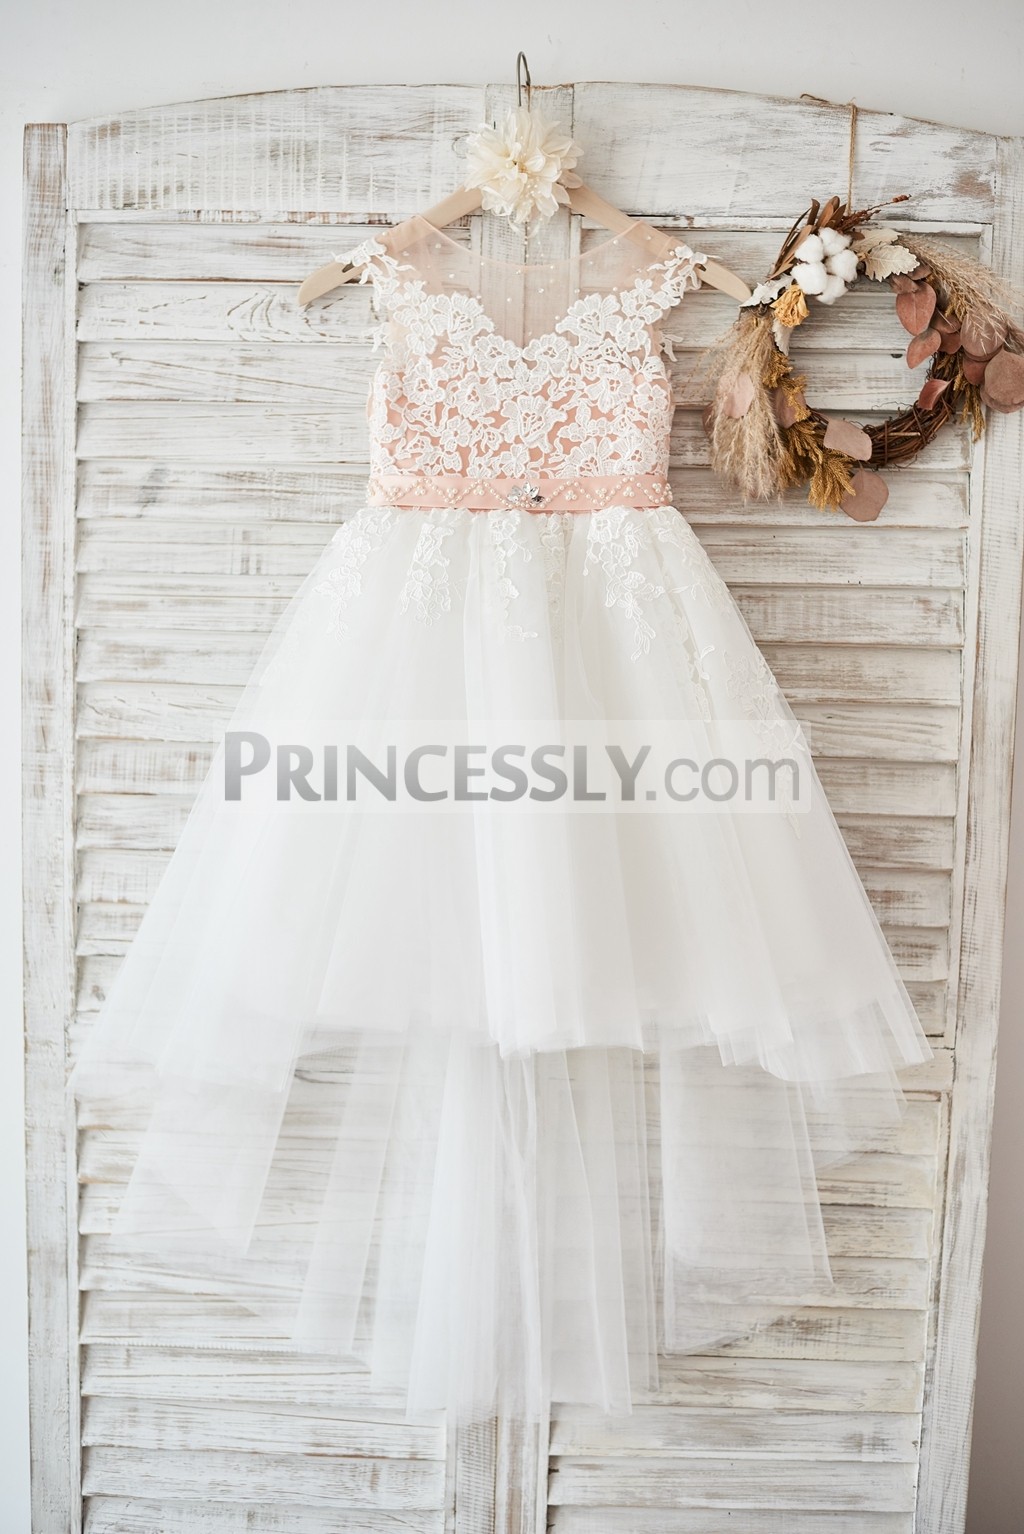 Princessly.com-K1003591-Cap Sleeves Ivory Lace Tulle Hi Low Wedding Party Flower Girl Dress with V Back/Beading-31